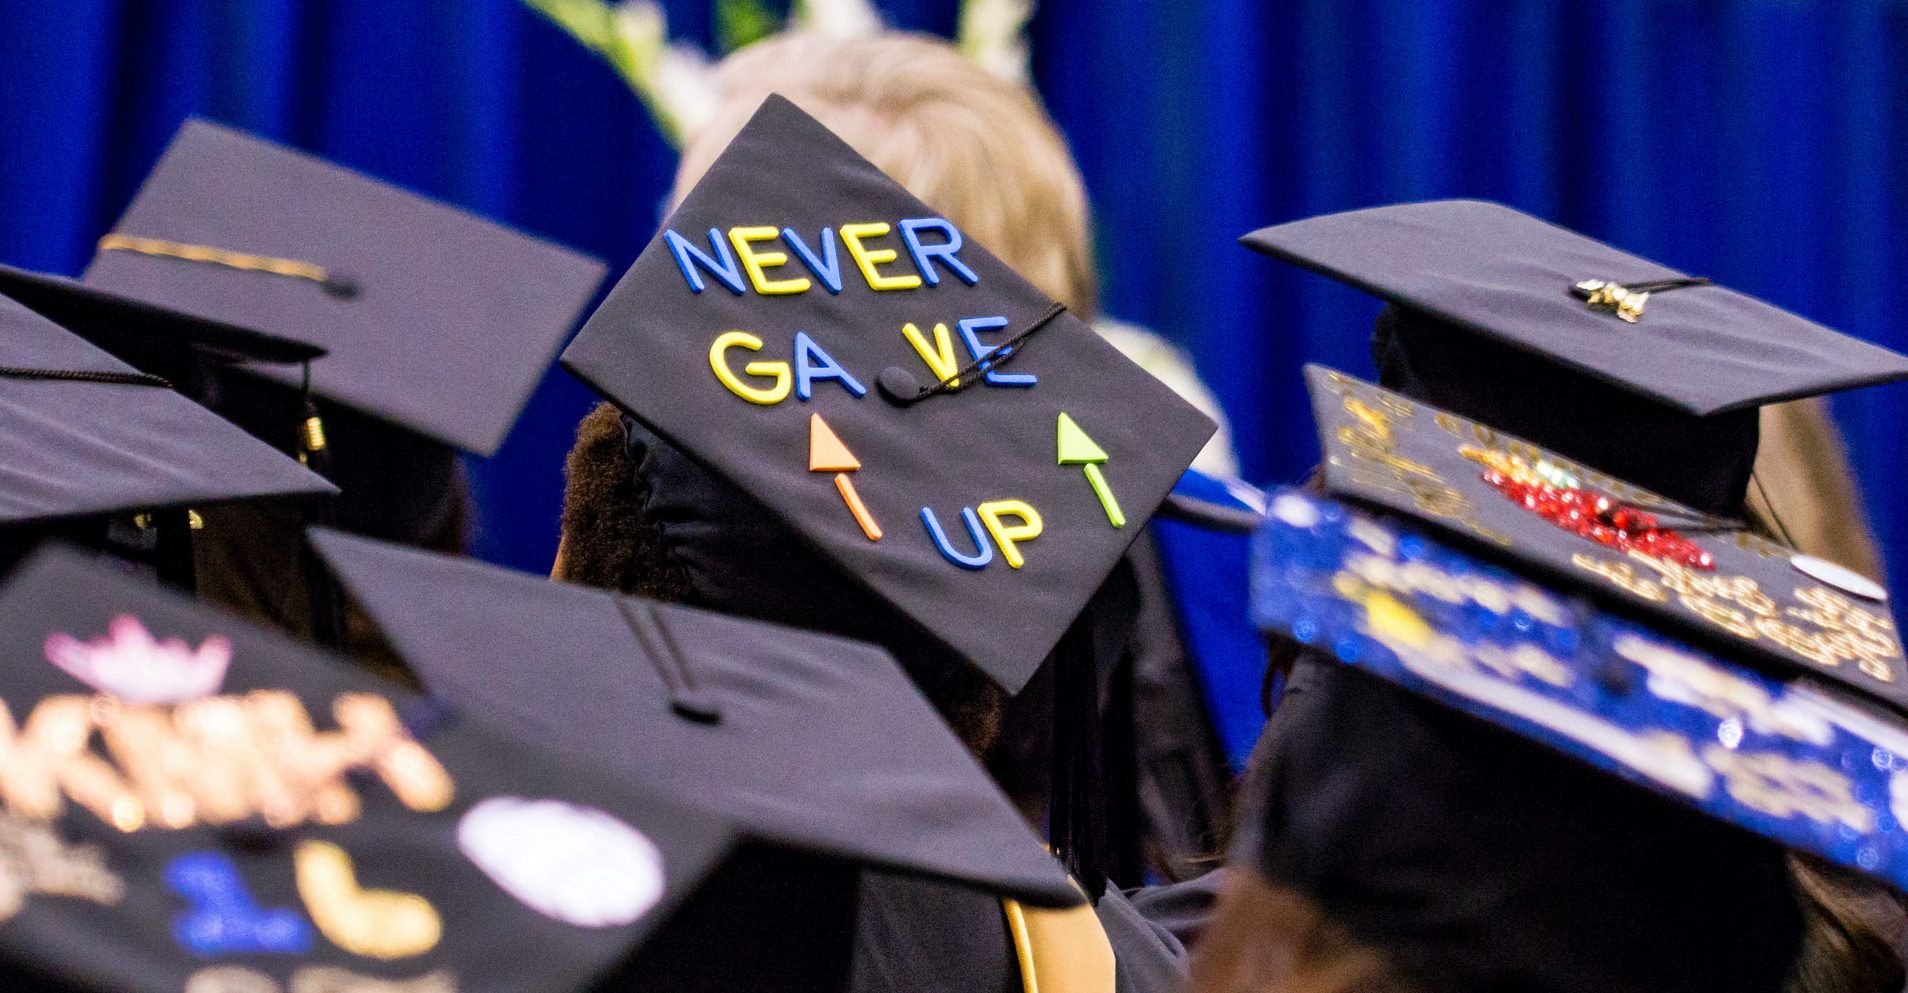 graduation cap with phrase "never gave up"